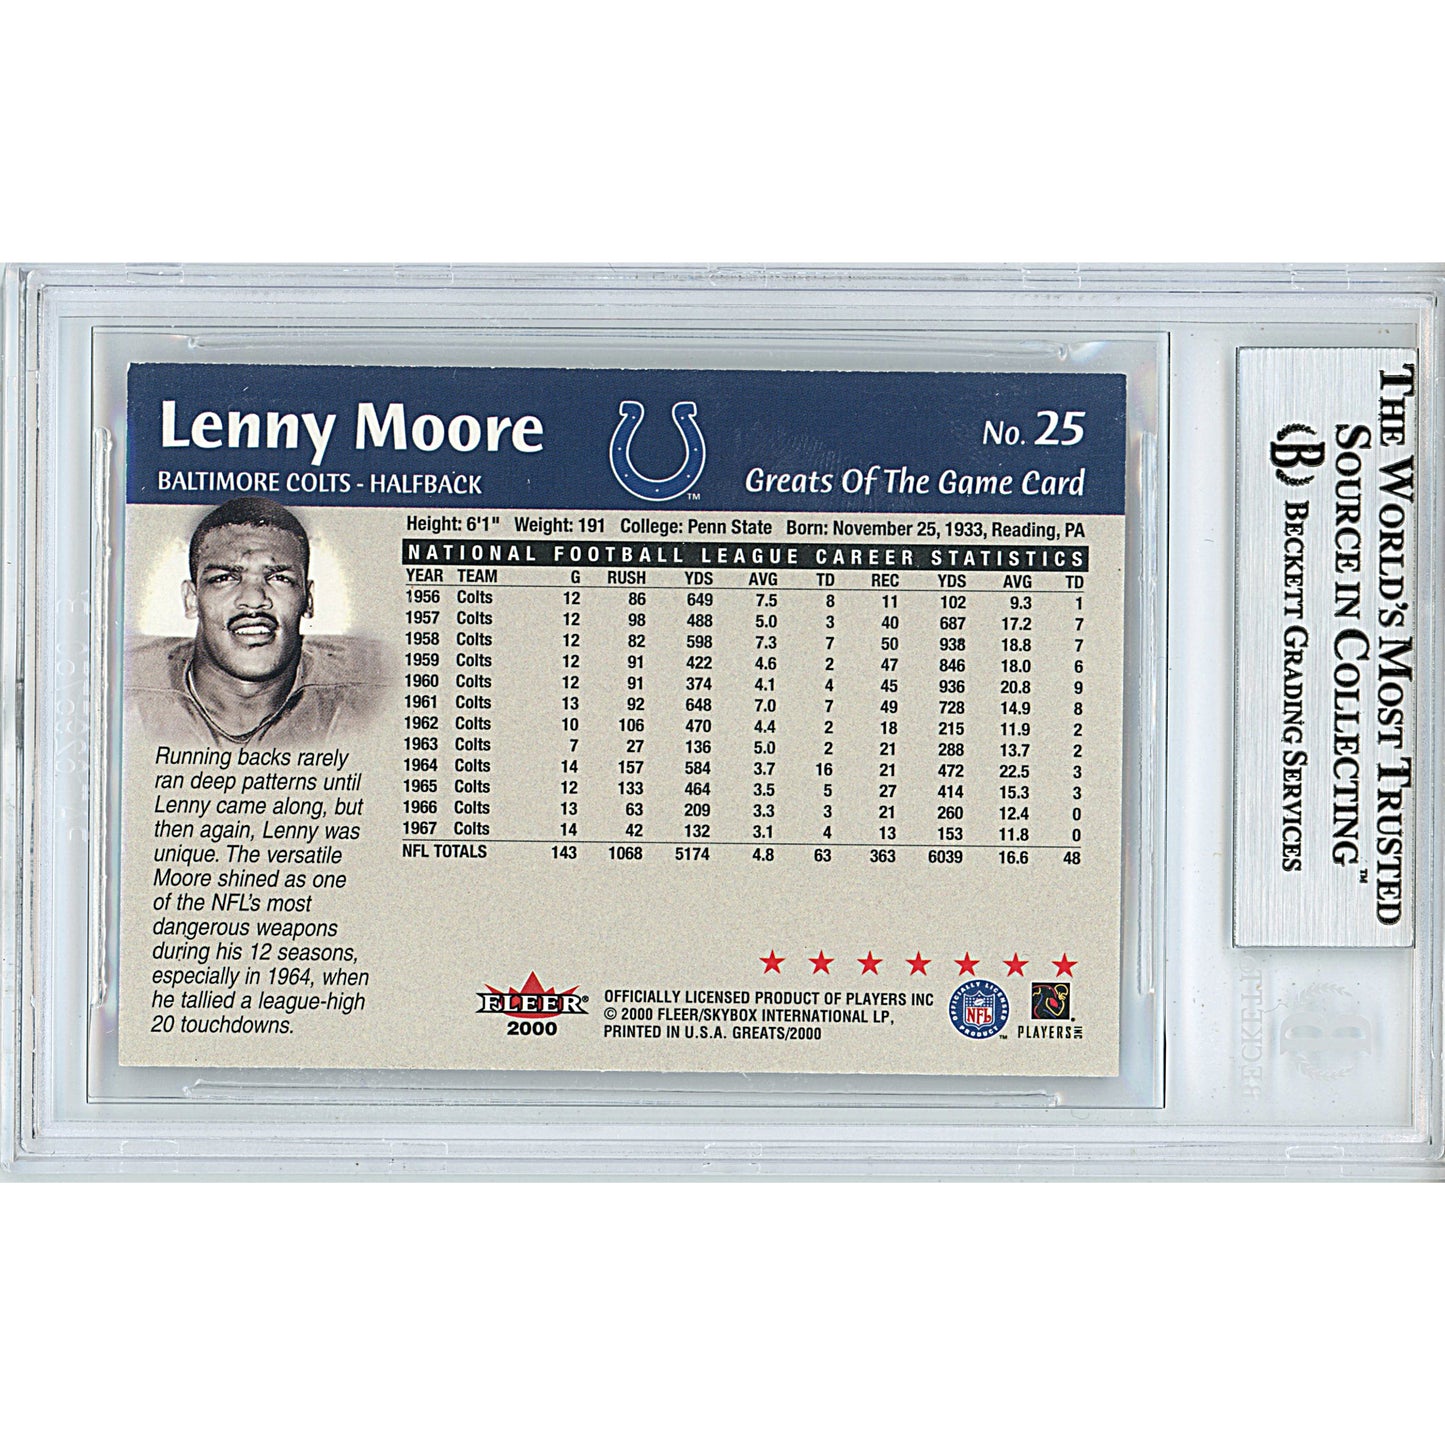 Footballs- Autographed- Lenny Moore Signed Baltimore Colts 2000 Fleer Greats of the Game Football Card Beckett BAS Authenticated Slabbed 00013190658 - 102